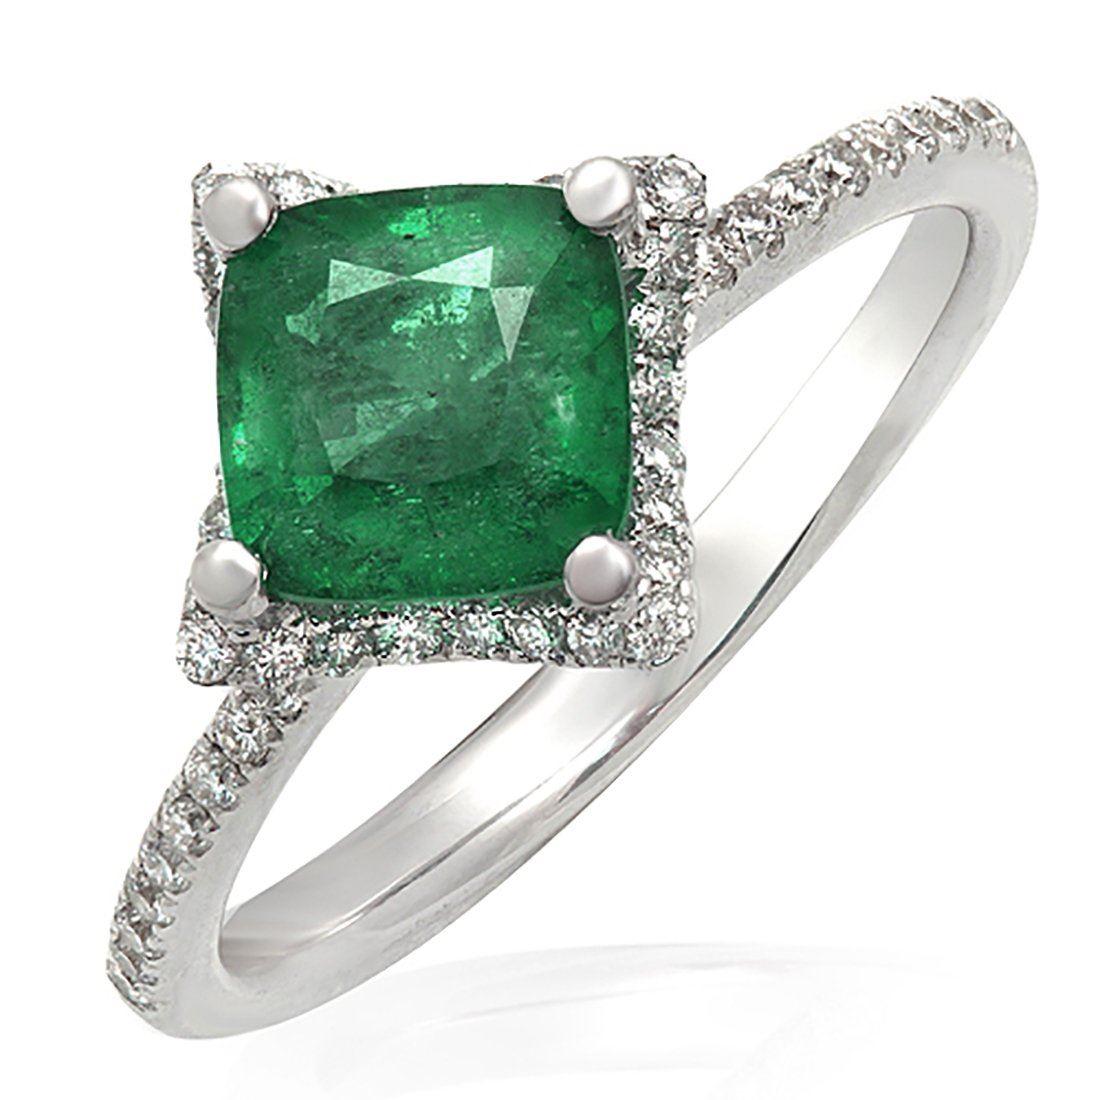 Top: 11 mm
Band Width: 2 mm
Metal: 18K White Gold 
Size: 6-9 ( Please message Us for your Size )
Hallmarks: 750
Total Weight: 3.4 Grams
Center Stone: 1.31 CT Zambian Emerald
Side Stone: 0.46 Ct G VS1 Diamonds 
Condition: New
Estimated Retail Price: